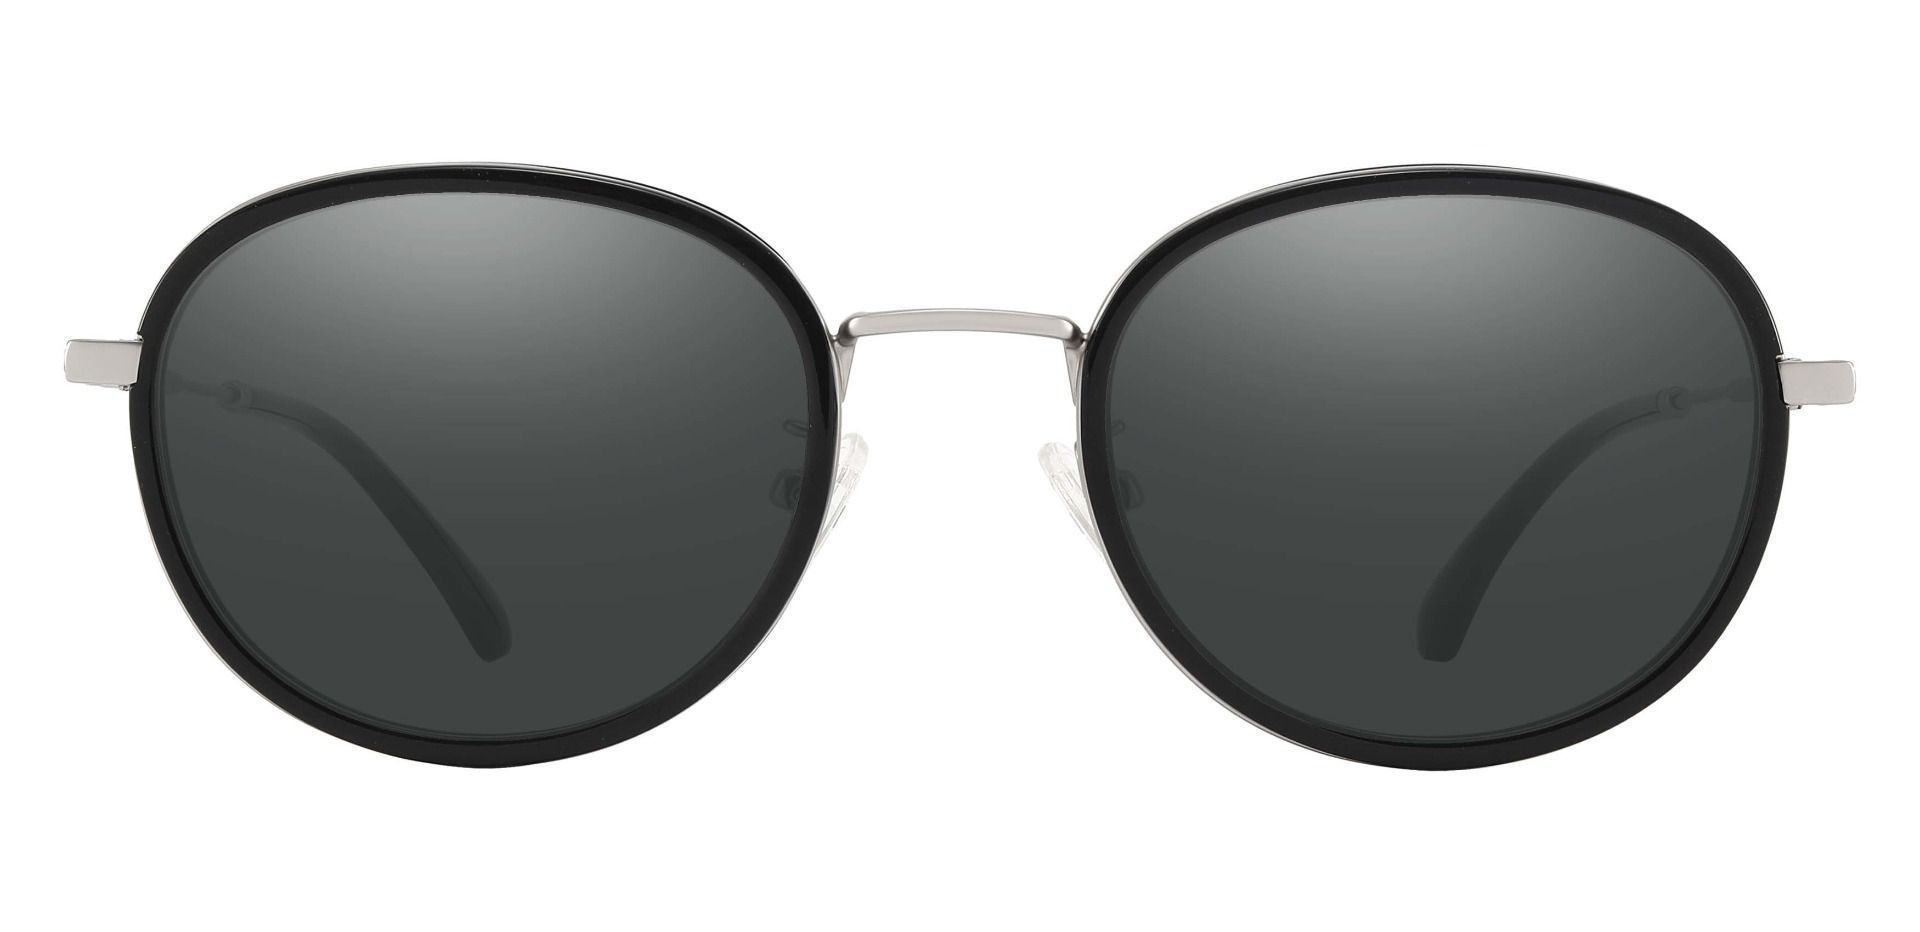 Edmore Oval Non-Rx Sunglasses - Black Frame With Gray Lenses